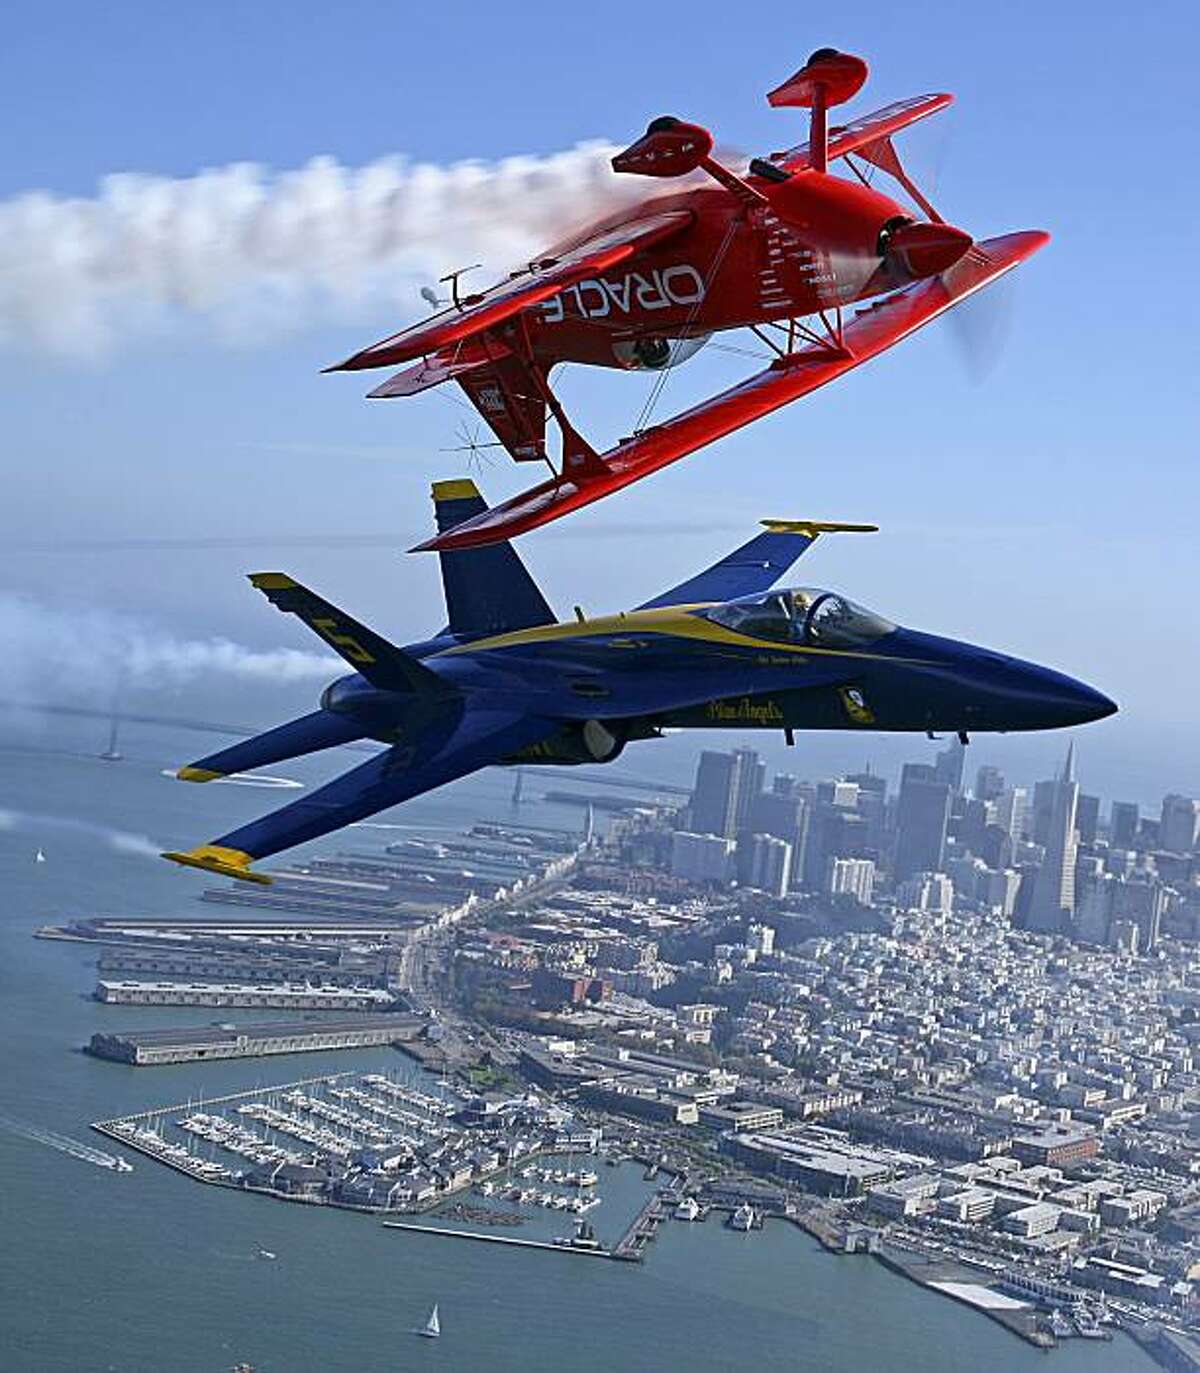 Sean Tucker flies his Oracle Challenger bi-plane inverted over US Marine Corps Major Nathan Miller, flying F/A-18 Blue Angel #5 Thursday, Oct. 8, 2009, over San Francisco Bay. The U. S. Navy’s Flight Demonstration Squadron Blue Angels and Tucker are preparing for two air shows this weekend for Fleet Week San Francisco 2009 festivities, which celebrate the area's long naval history.